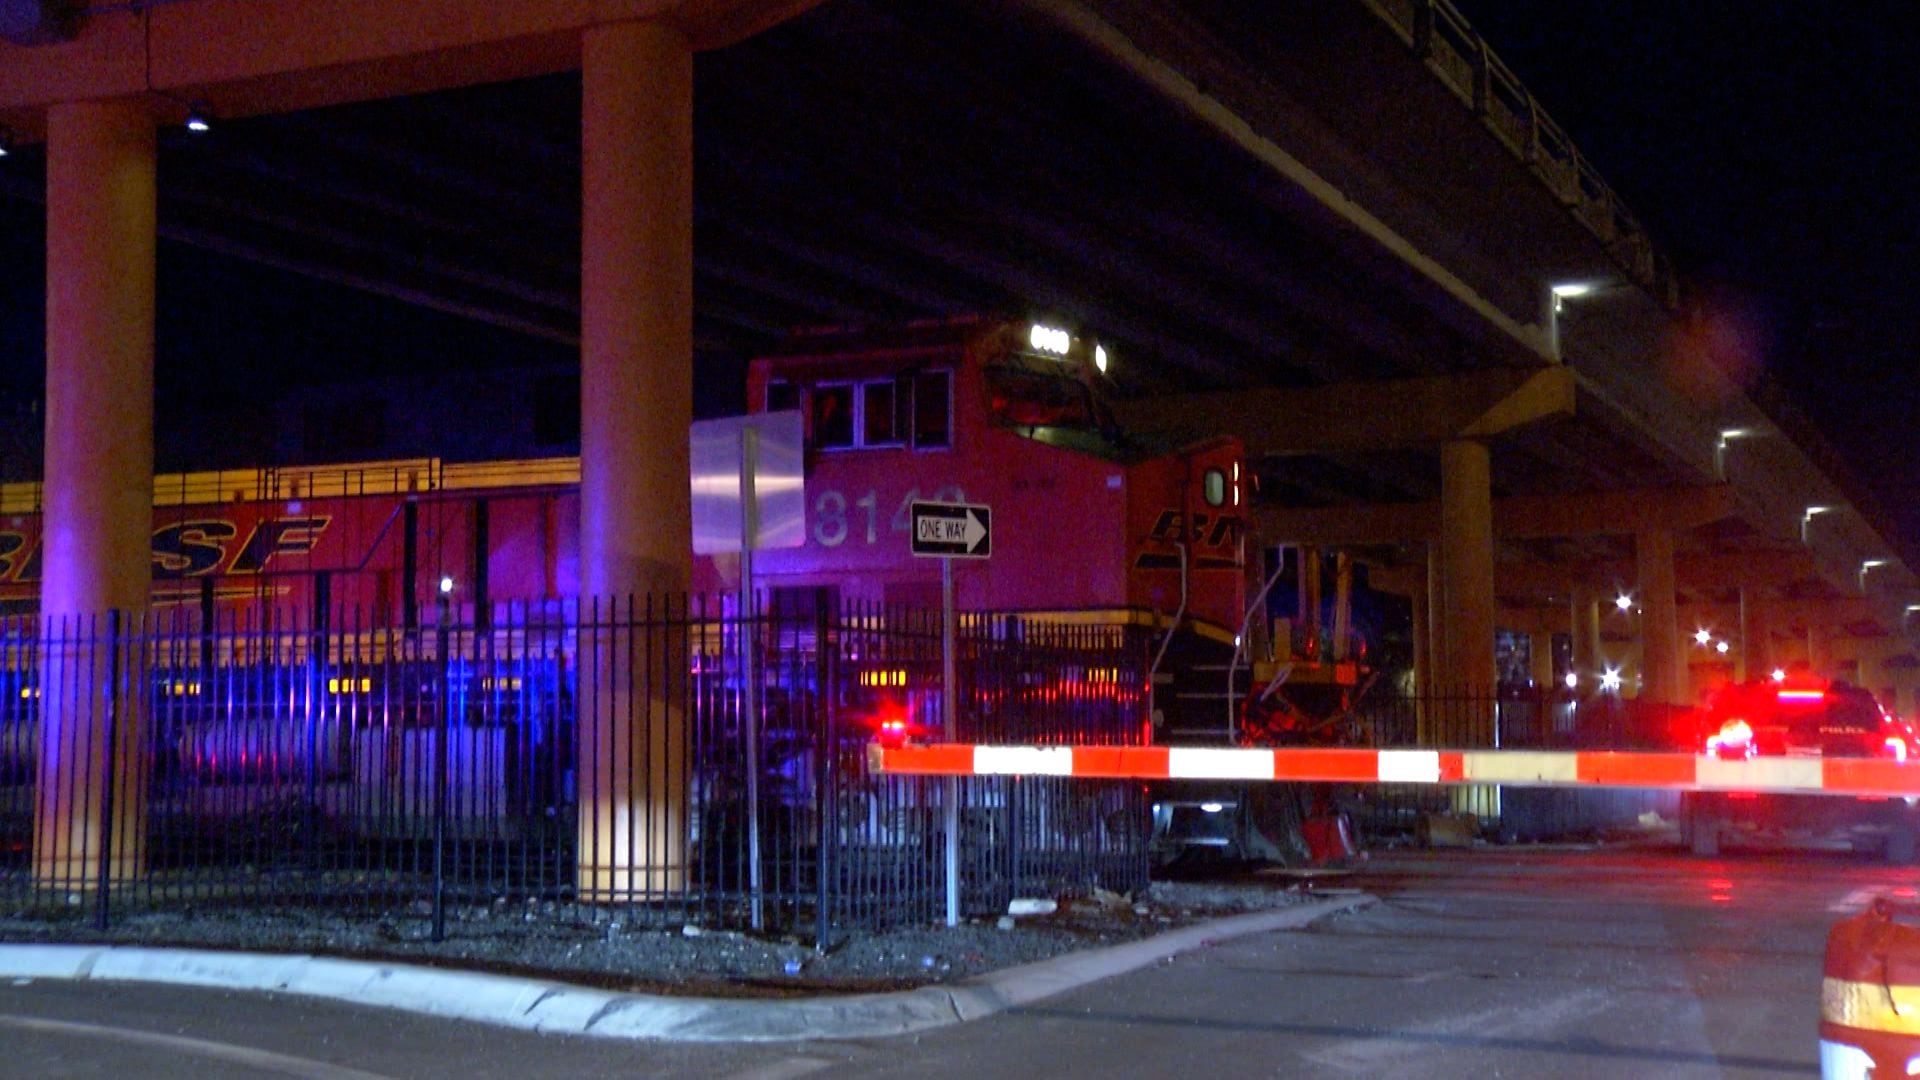 Man in wheelchair trying to cross tracks hit by train, police say